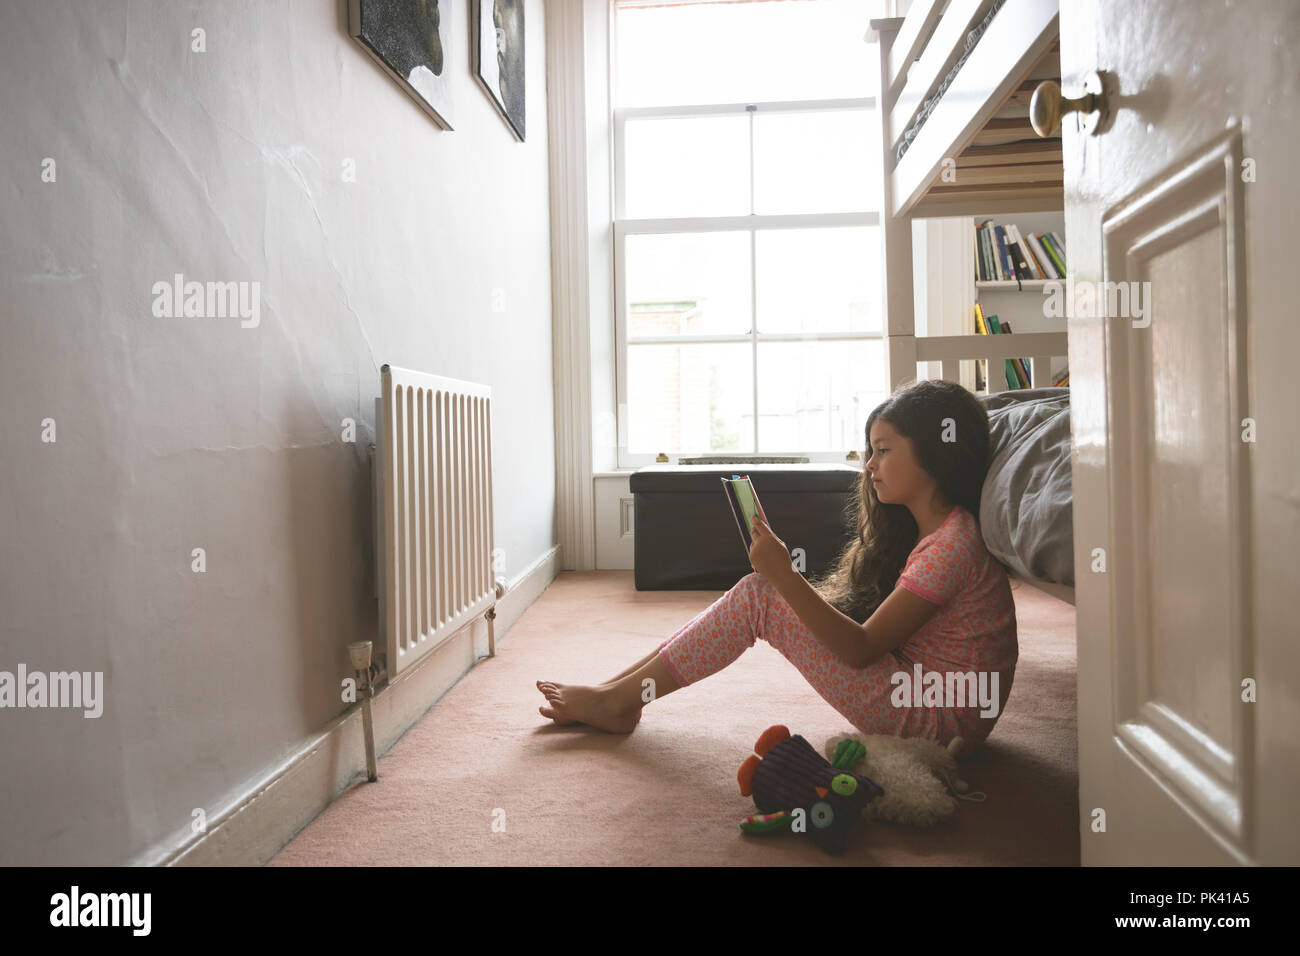 Girl reading book in bedroom Banque D'Images